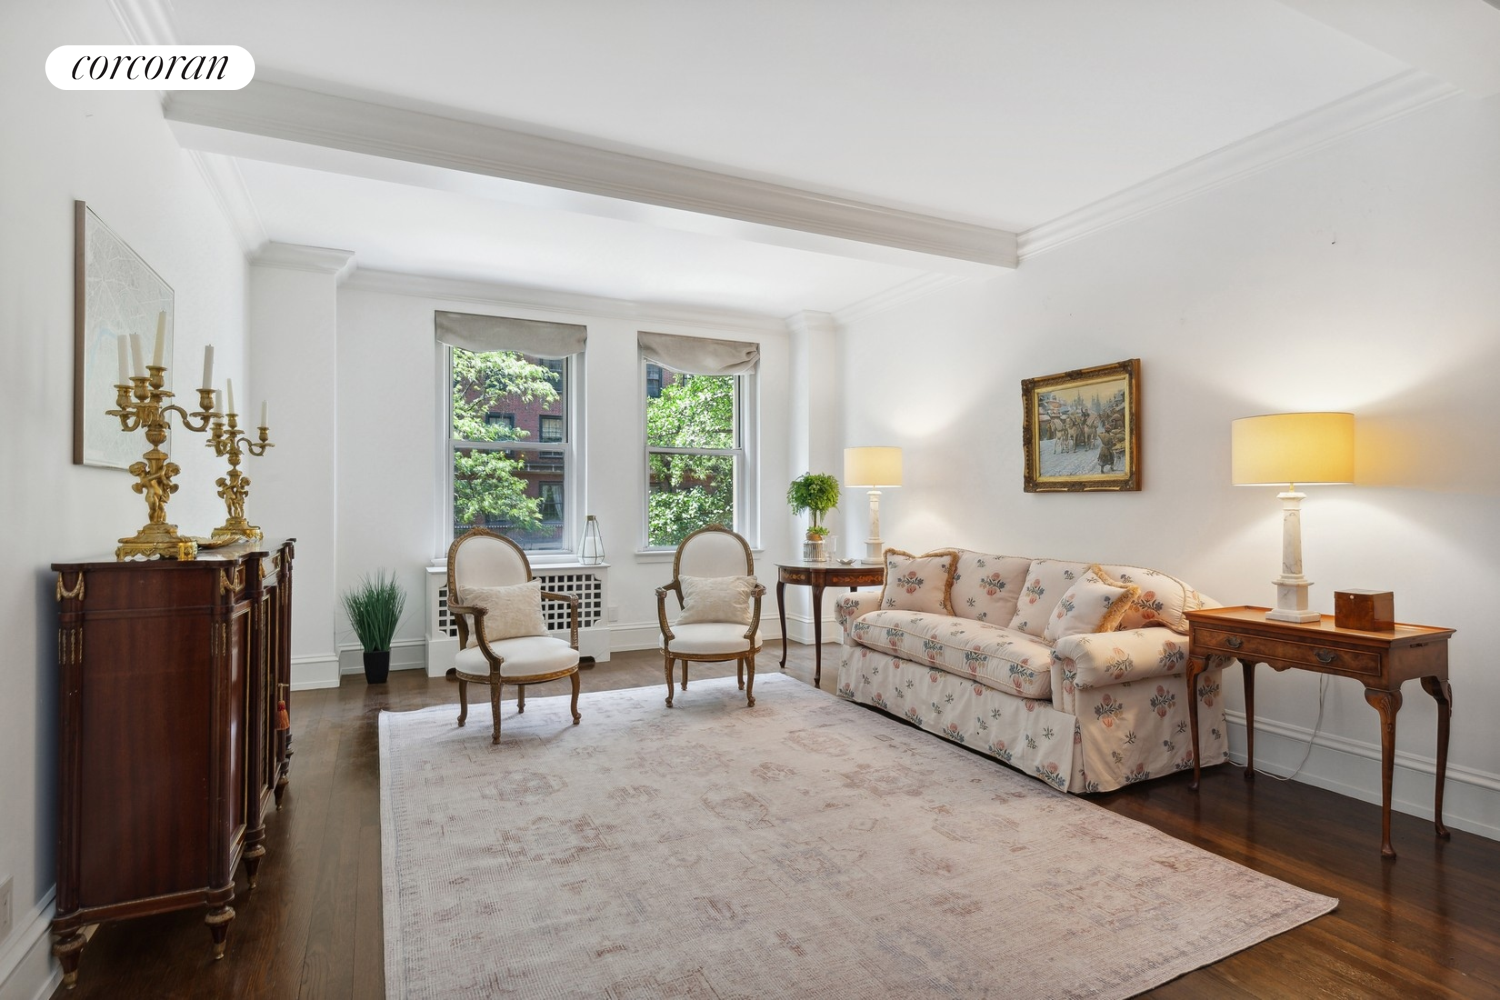 435 East 57th Street 3B, Sutton, Midtown East, NYC - 2 Bedrooms  
2 Bathrooms  
5 Rooms - 